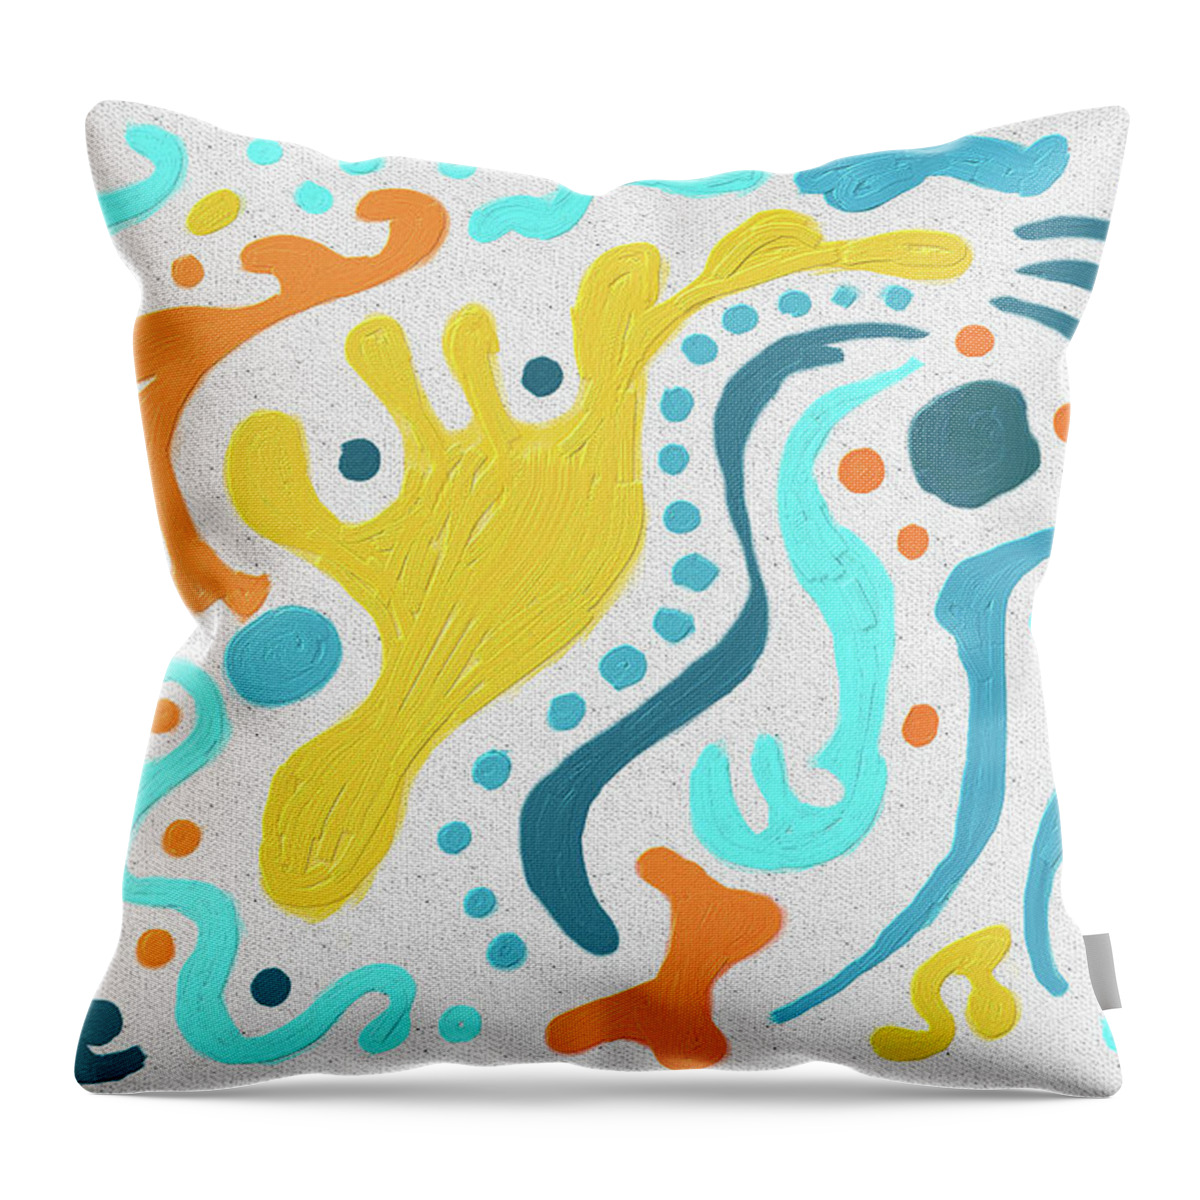 Abstract Throw Pillow featuring the painting Diffusion by Christina Wedberg